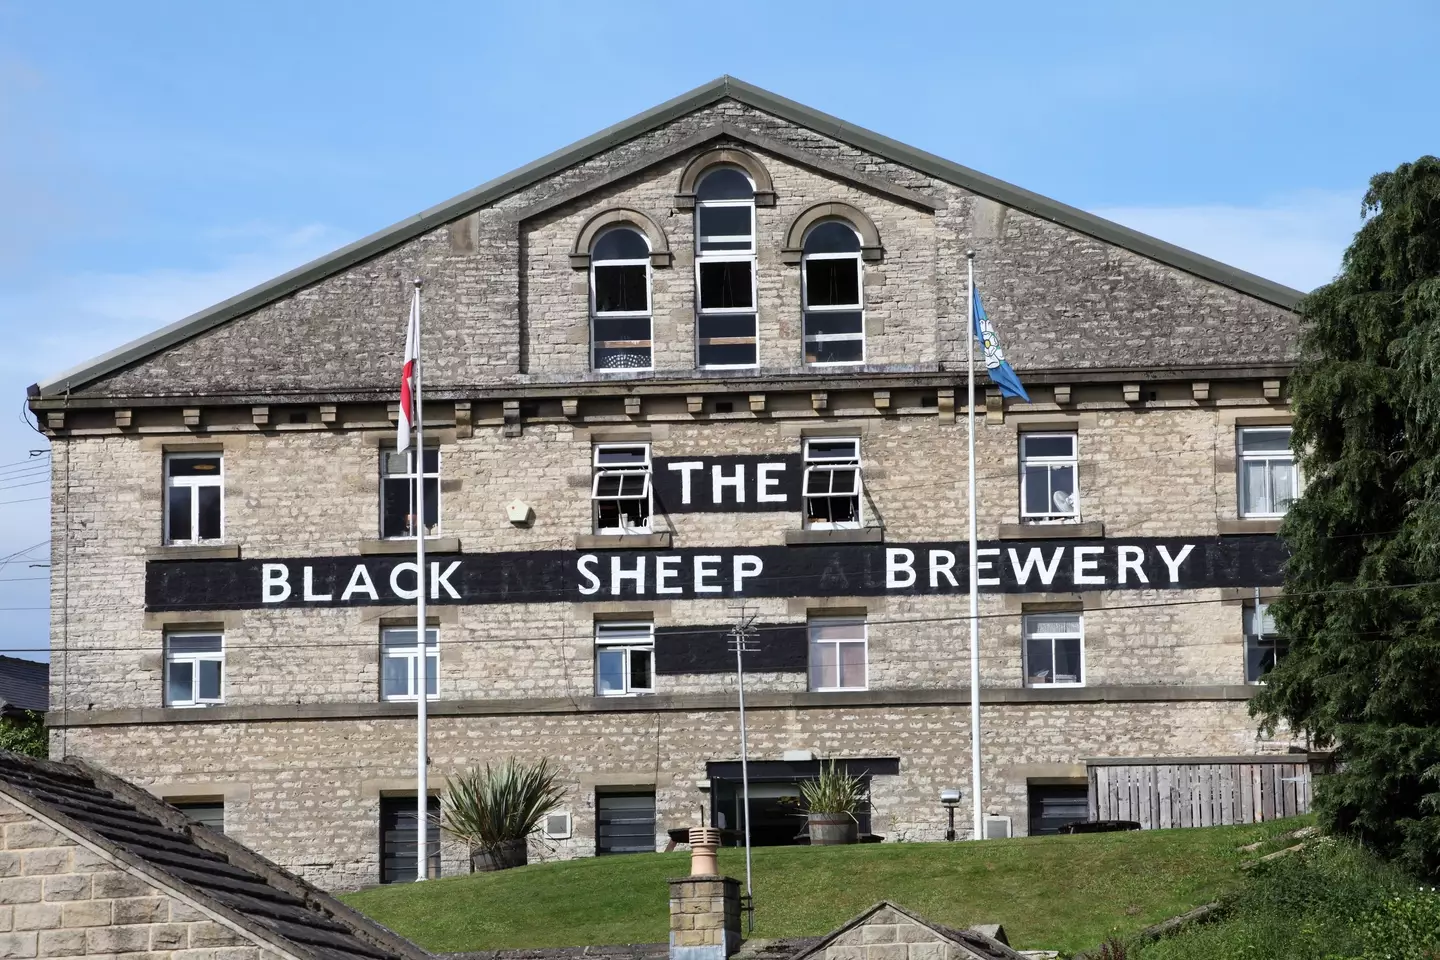 Costs are soaring across the hospitality industry, including at Black Sheep brewery.